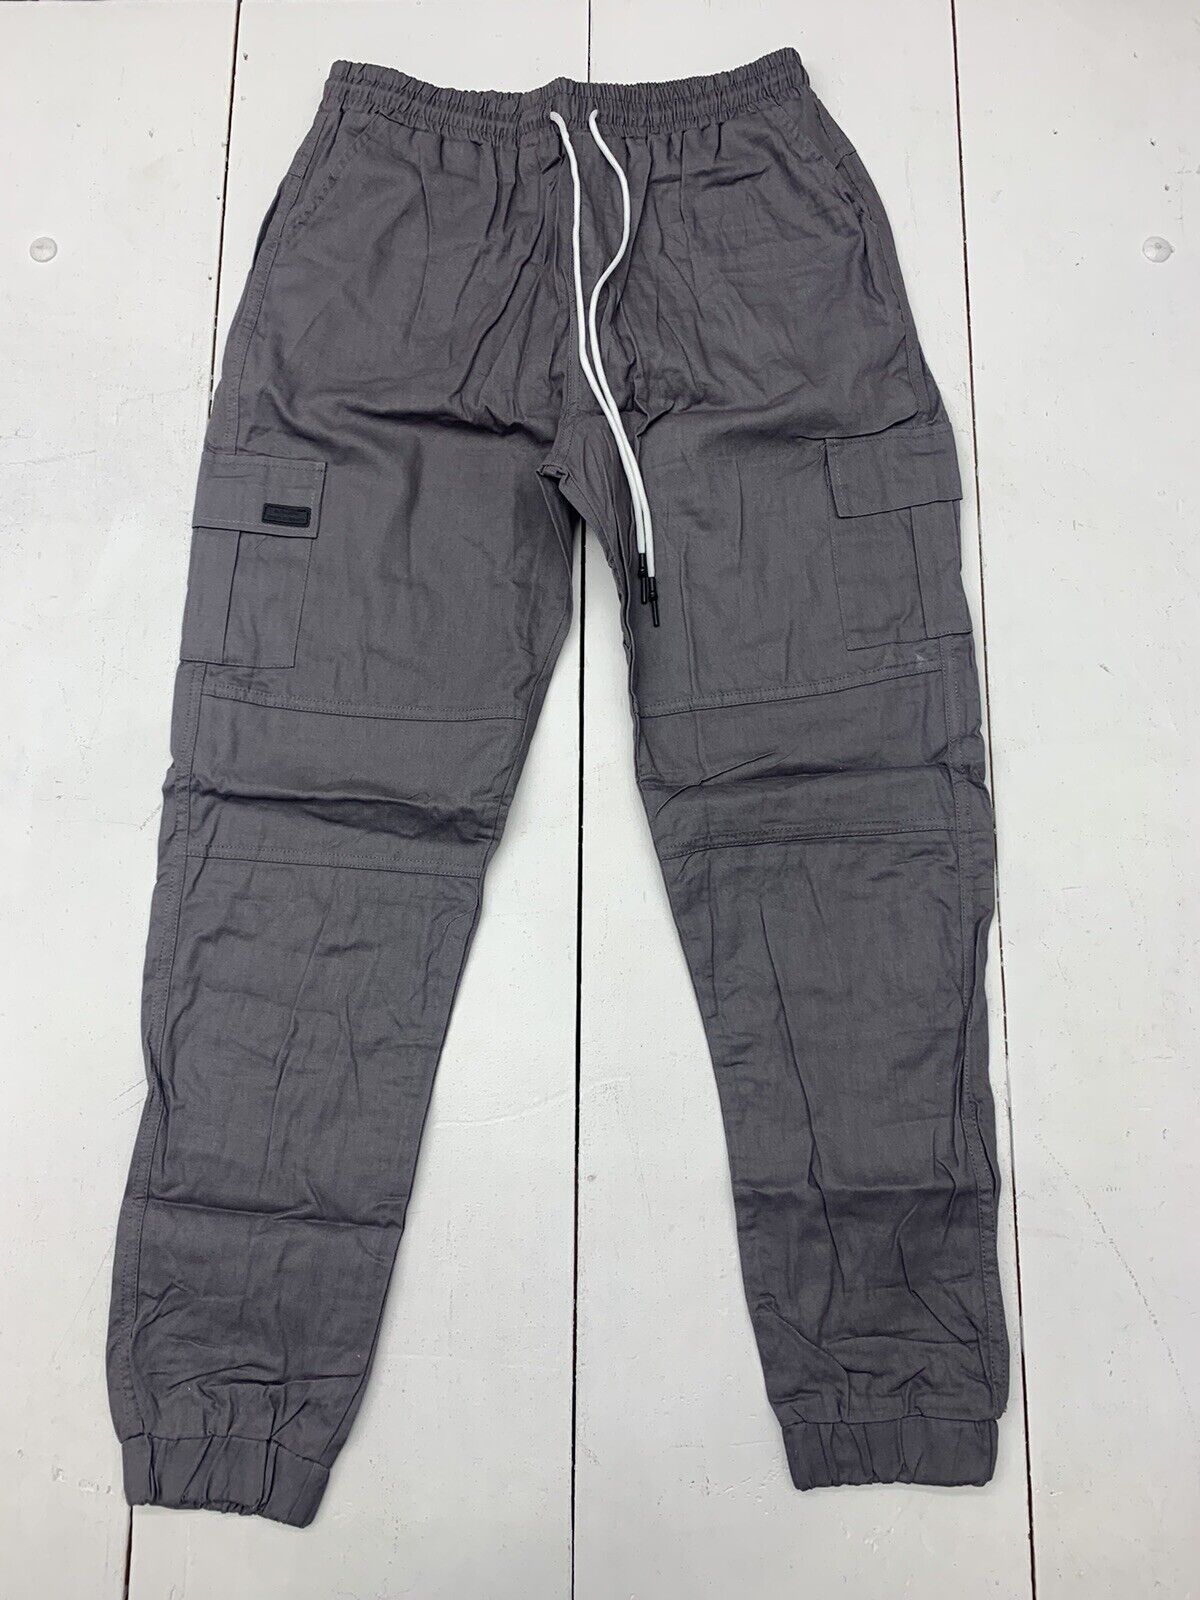 Mens Charcoal Gray Joggers Size Large - beyond exchange